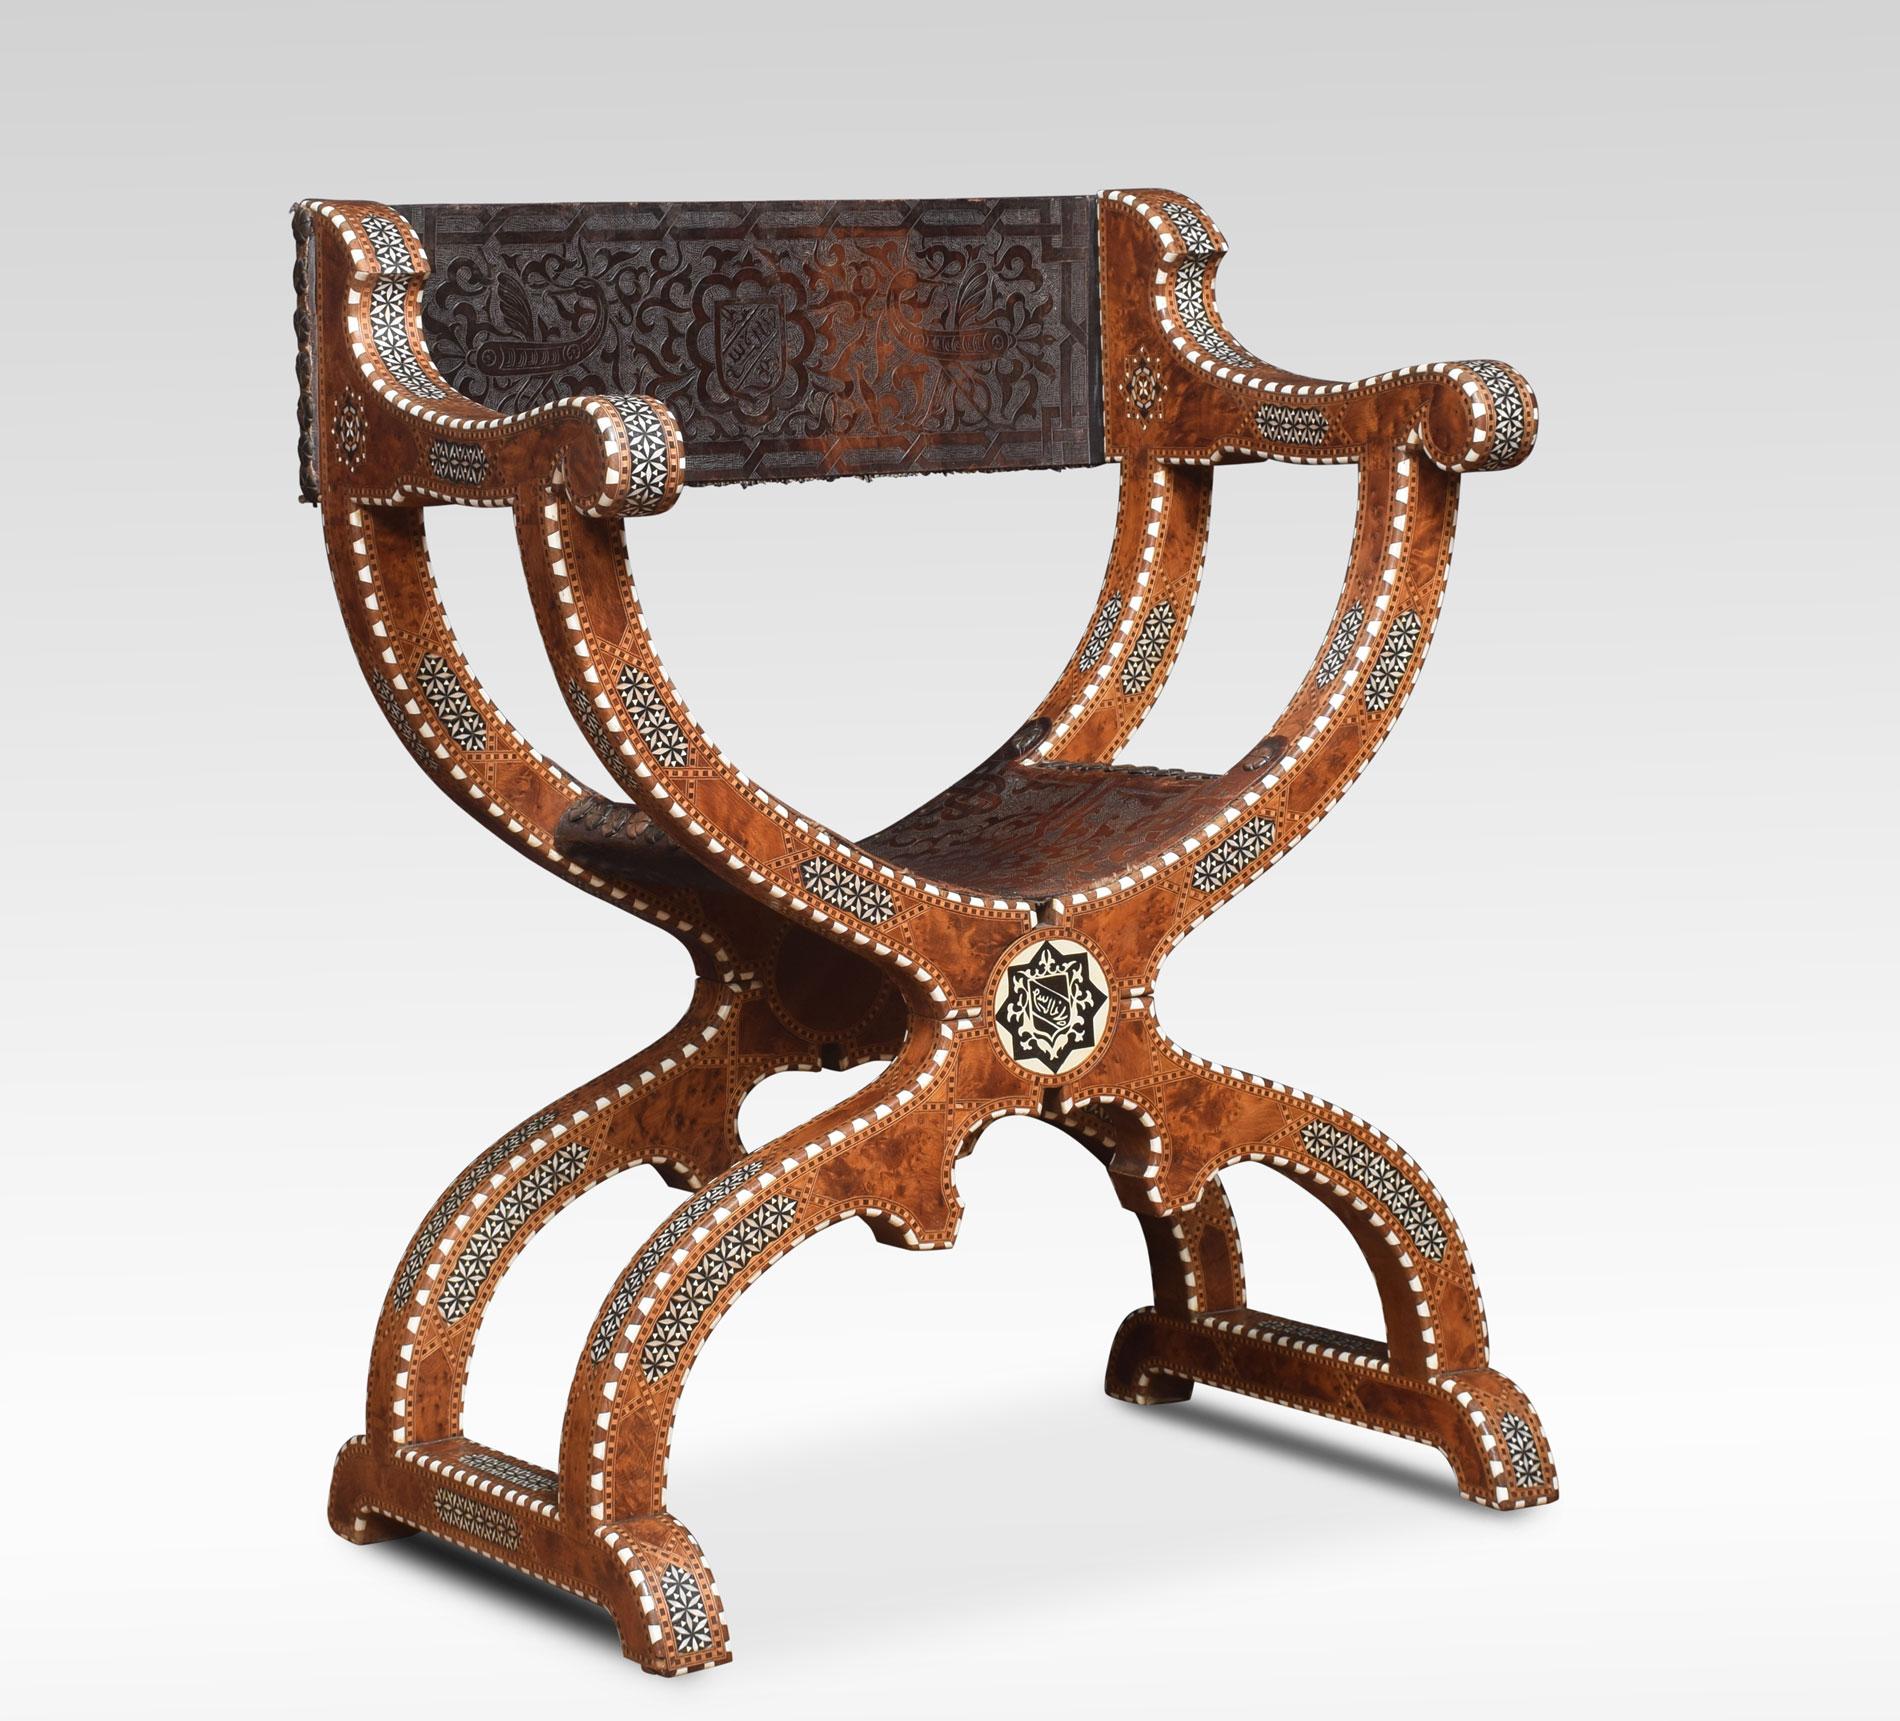 Late 19th century Savonarola armchair. The leatherback over scroll supports and leather seat raised up on shaped legs and bracket feet. The chair decorated with pseudo calligraphy, shields, scrolls and geometric motifs.
Dimensions:
Height 35.5